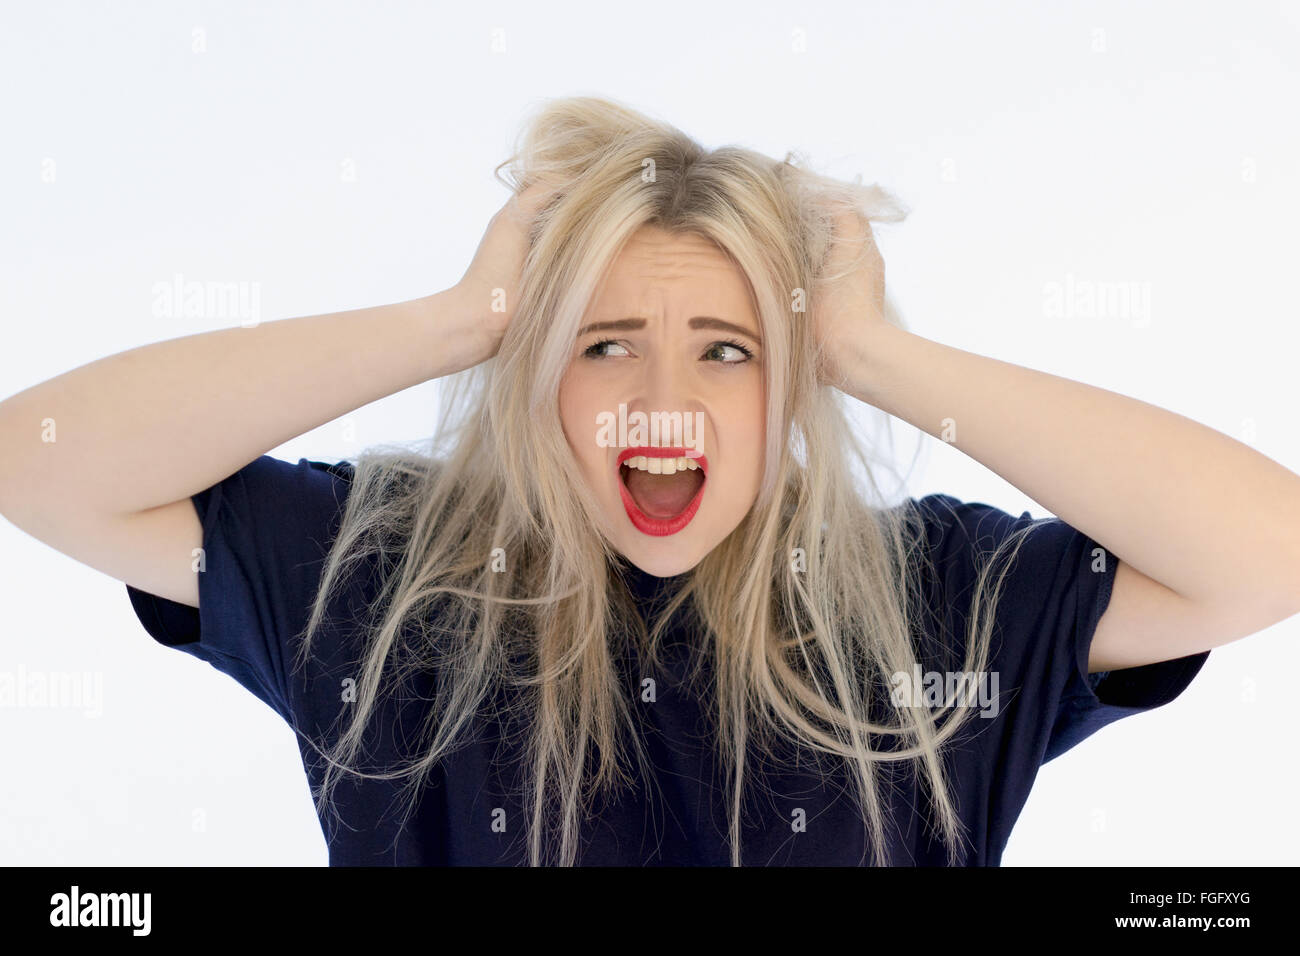 Woman with her hands in her long blonde hair with an expression of stress and frustration Stock Photo